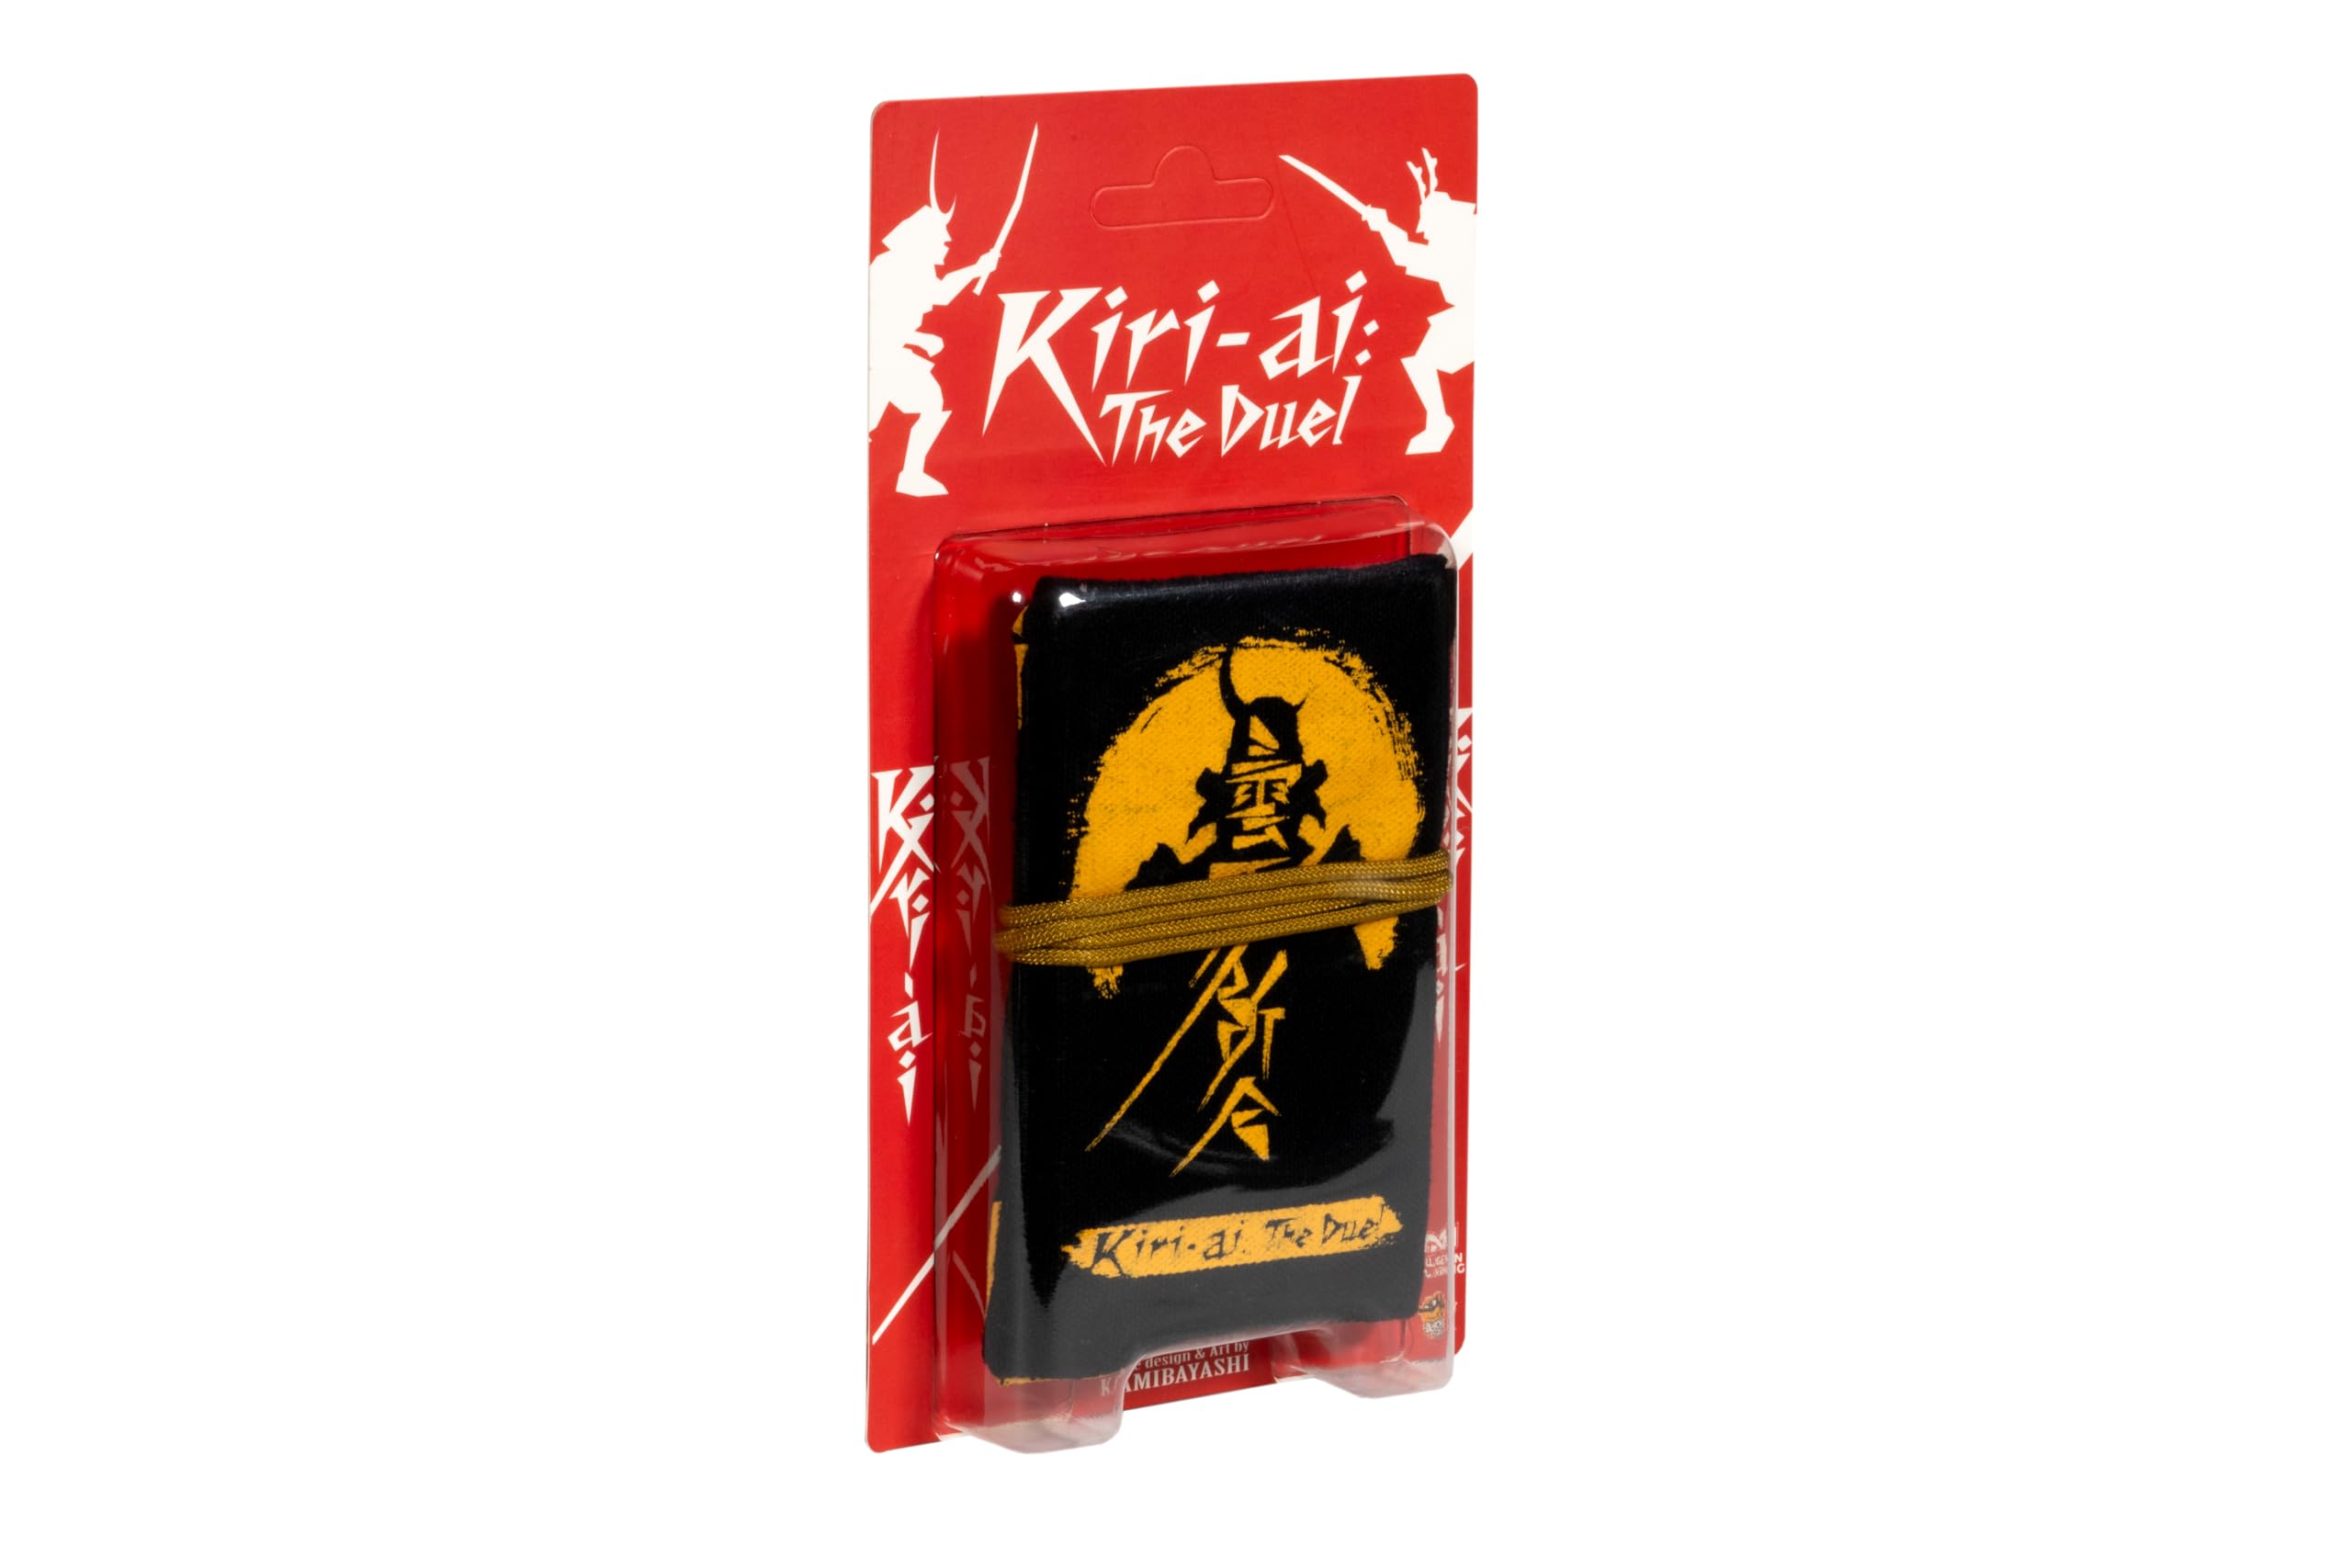 Lucky Duck Games Kiri-AI The Duel Card Game (Wallet Edition) - Fast-Paced Samurai Dueling for Two Players, Strategy Game for Kids and Adults, Ages 13+, 2 Players, 5-10 Min Playtime, Made